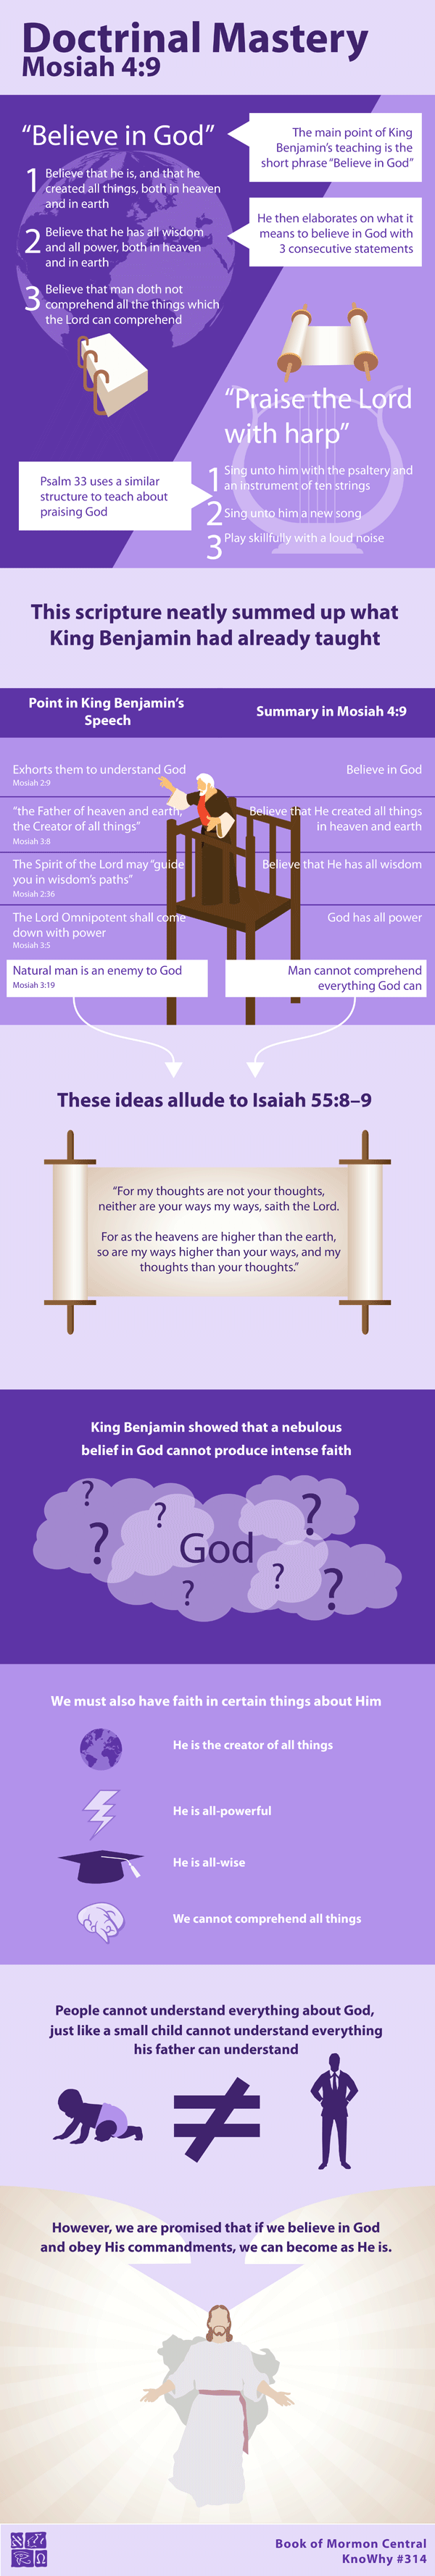 Doctrinal Mastery Mosiah 4:9 Infographic by Book of Mormon Central